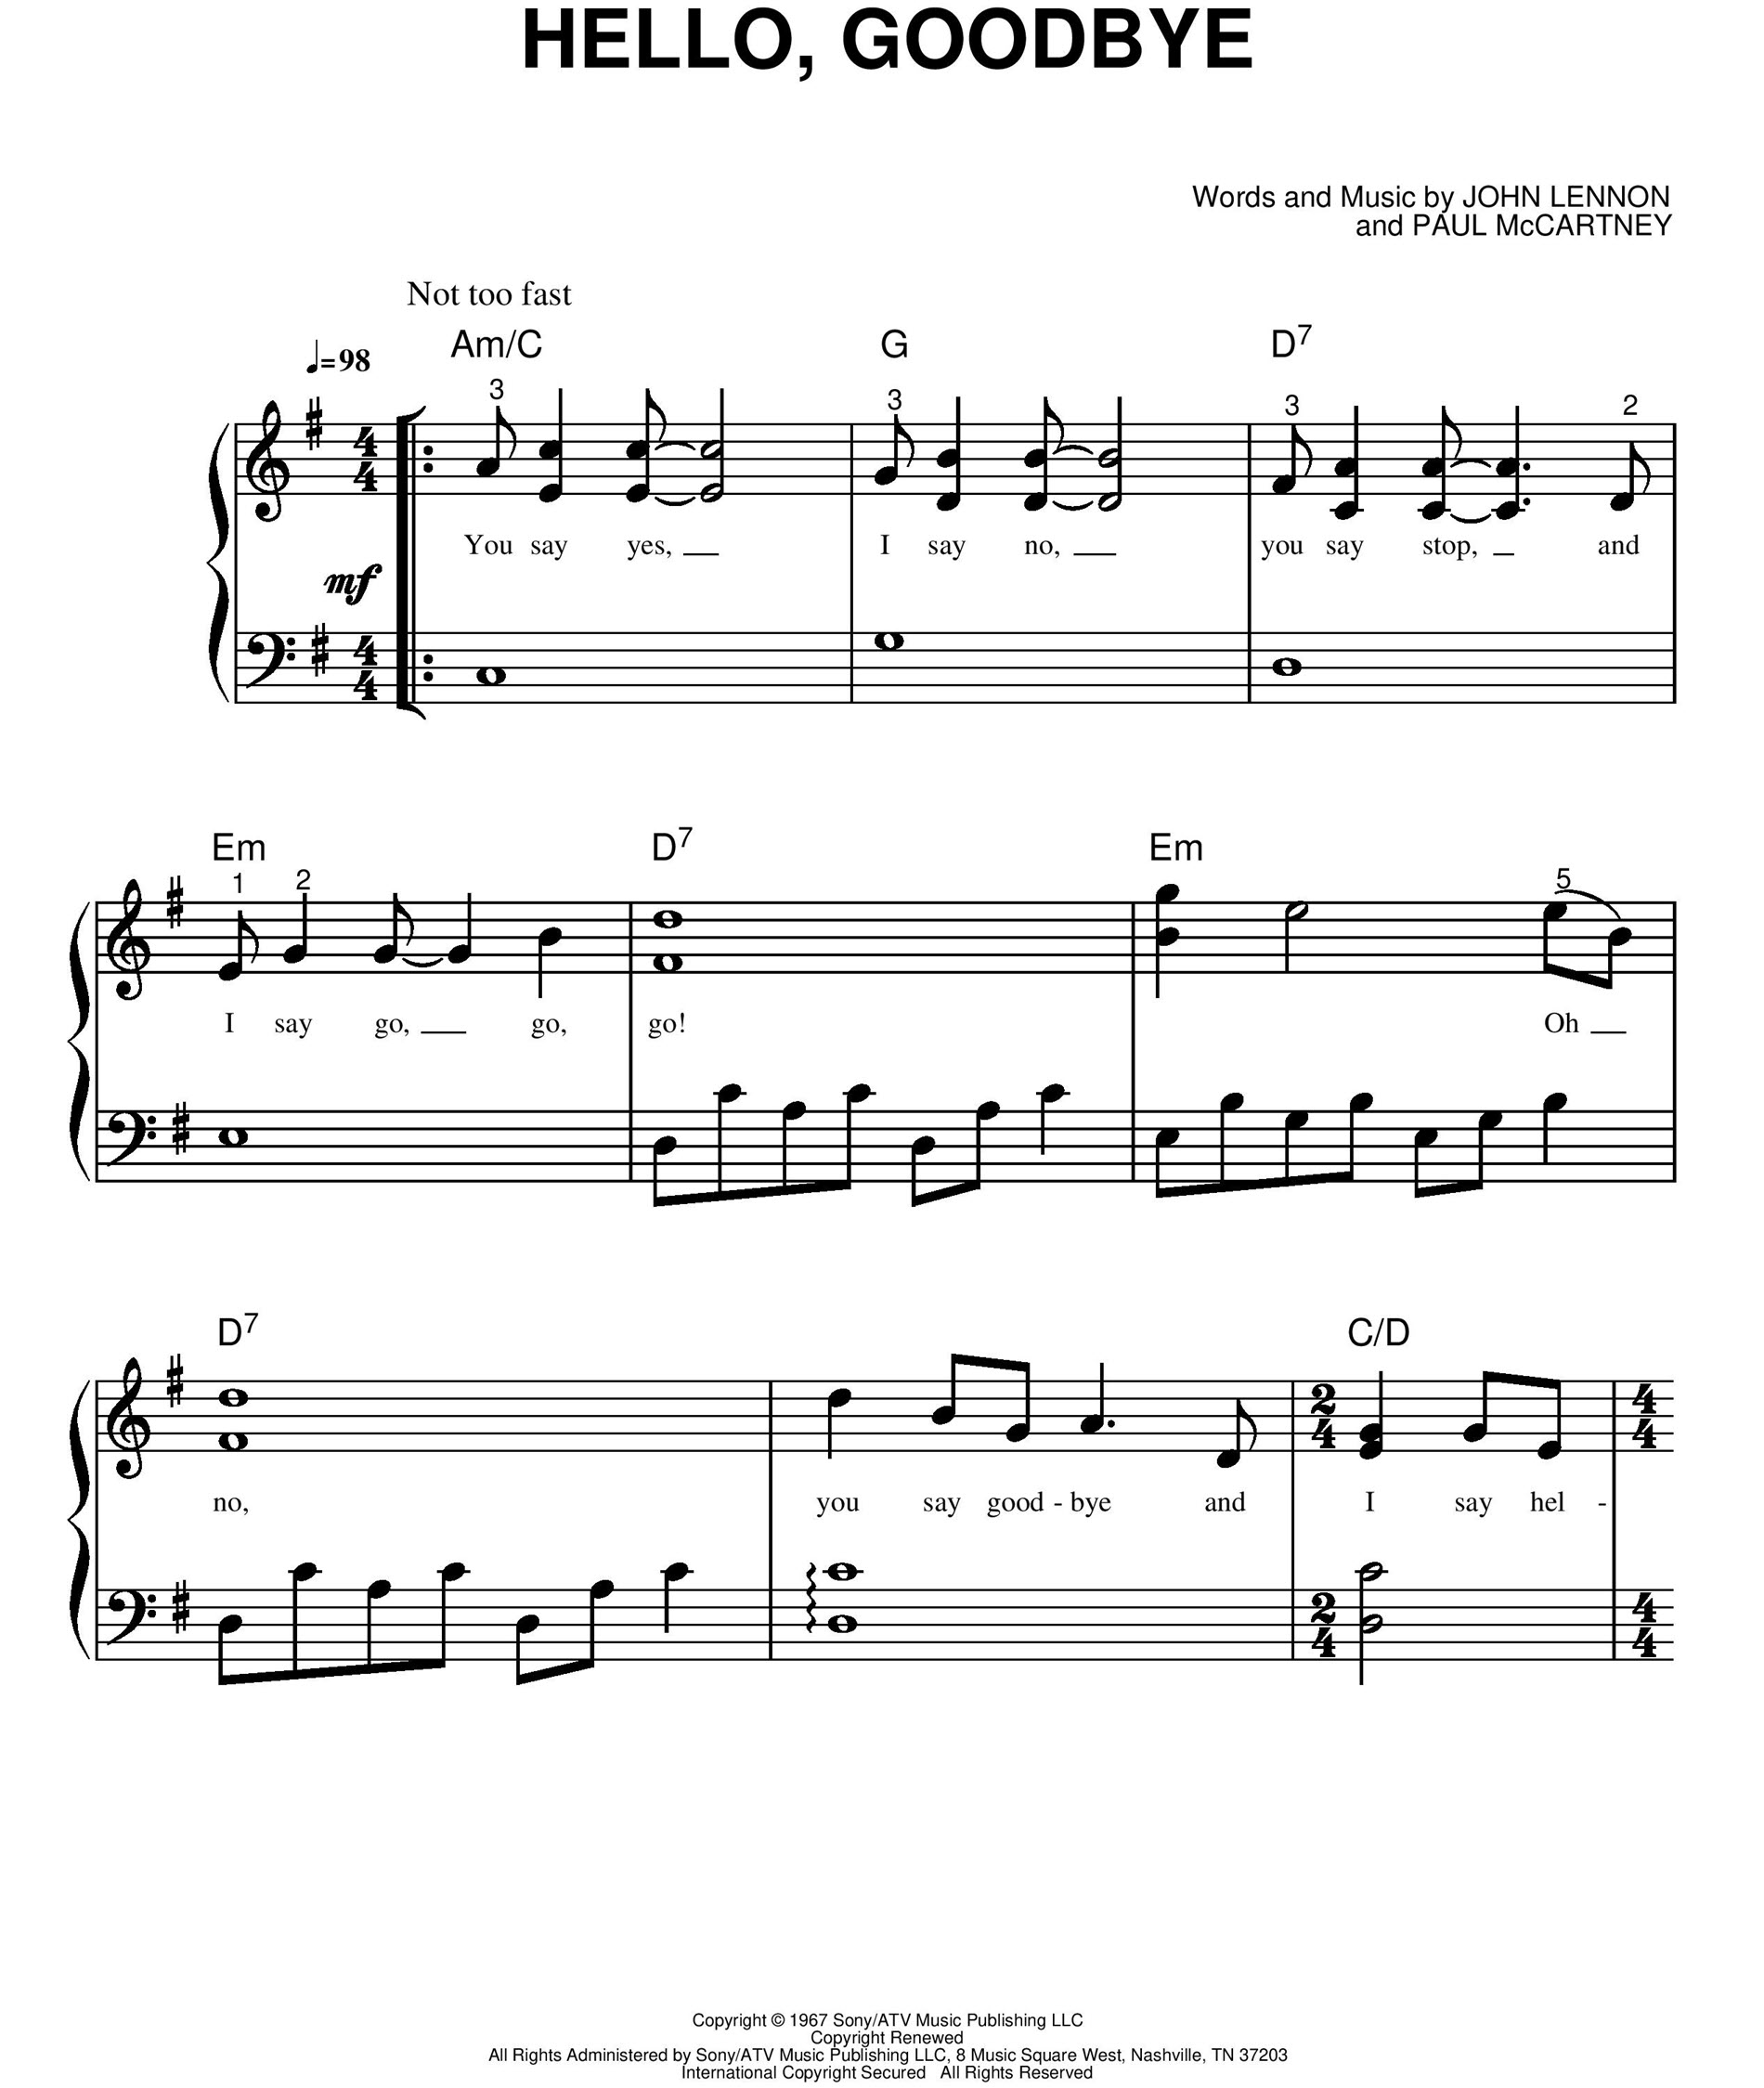 First page of a song's sheet music.